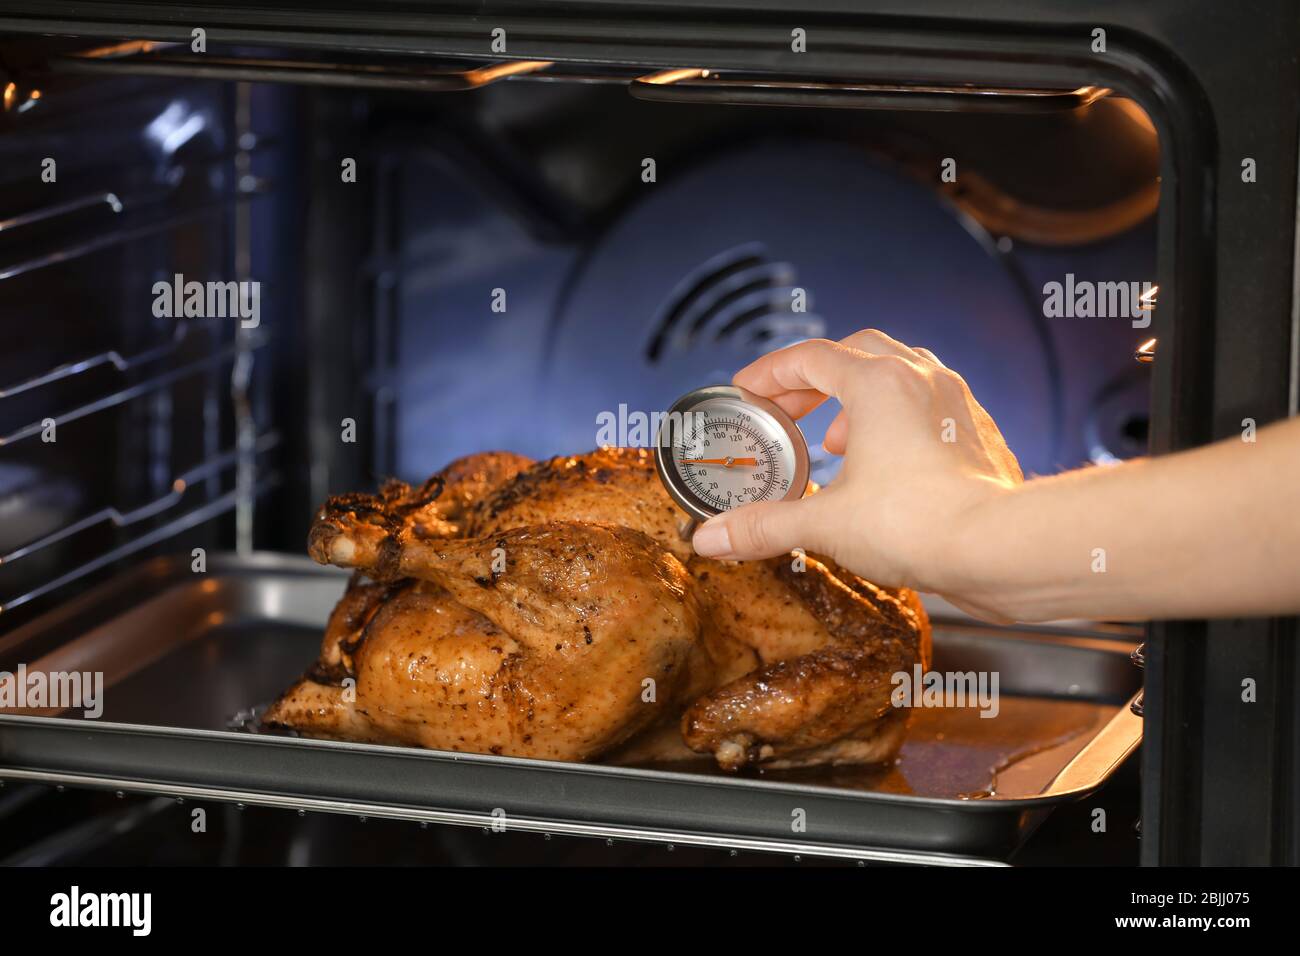 https://c8.alamy.com/comp/2BJJ075/young-woman-measuring-temperature-of-whole-roasted-turkey-with-meat-thermometer-2BJJ075.jpg